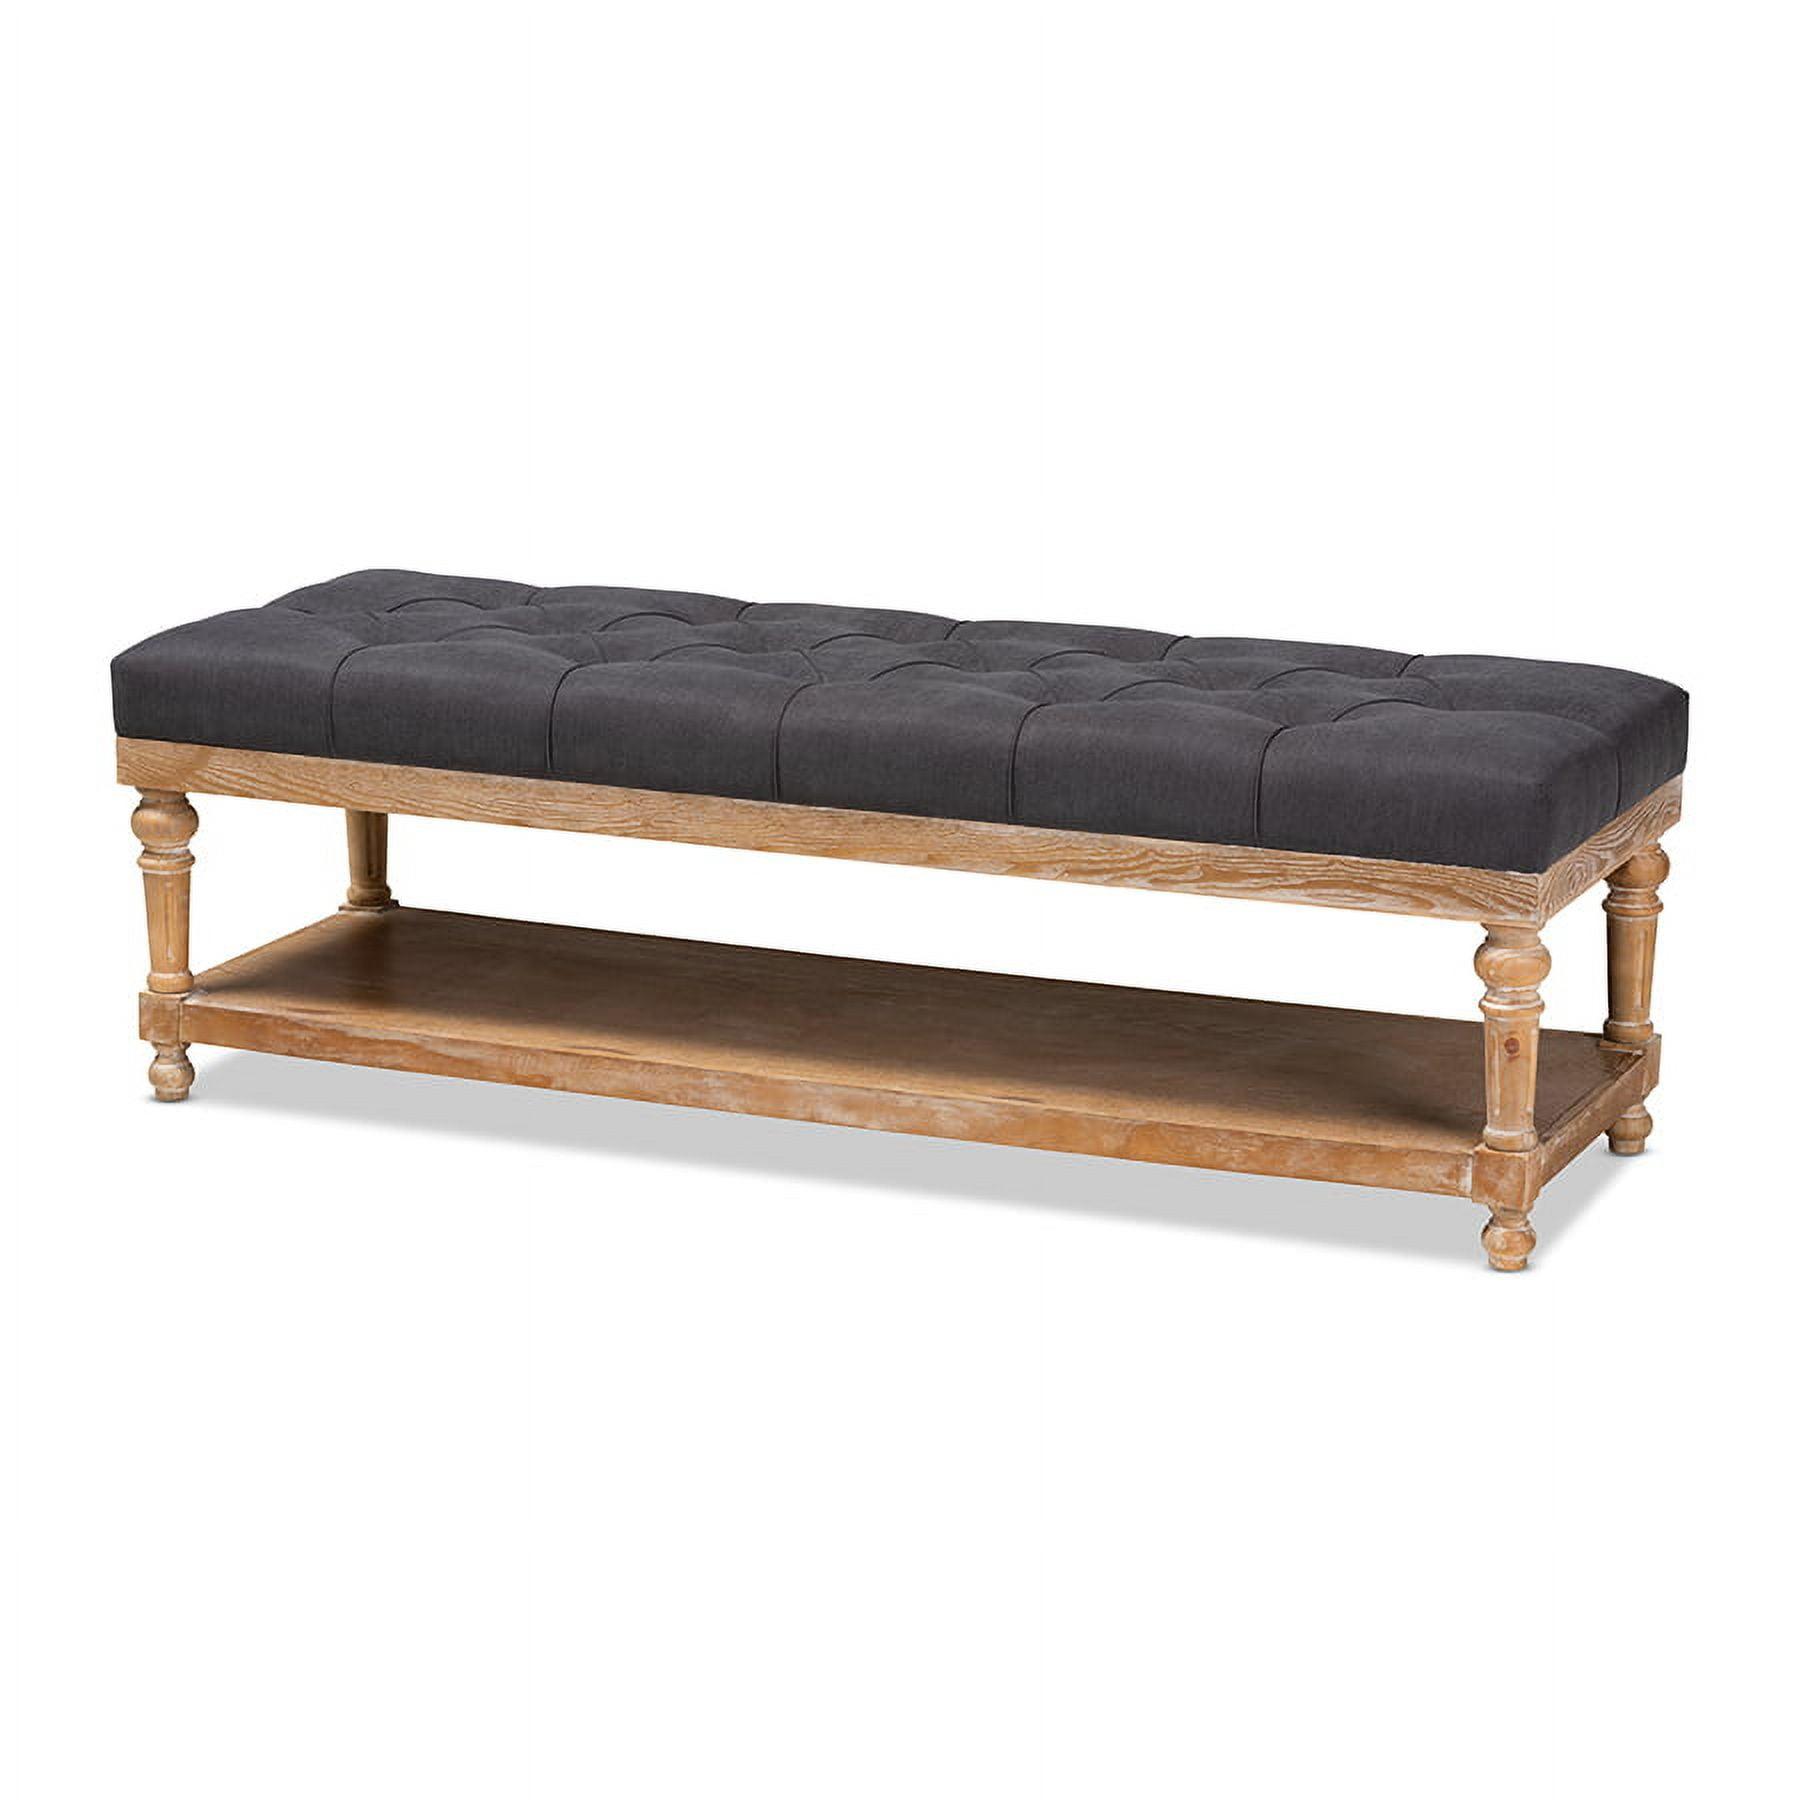 Charcoal Linen and Greywashed Wood Storage Bench with Tufted Detail